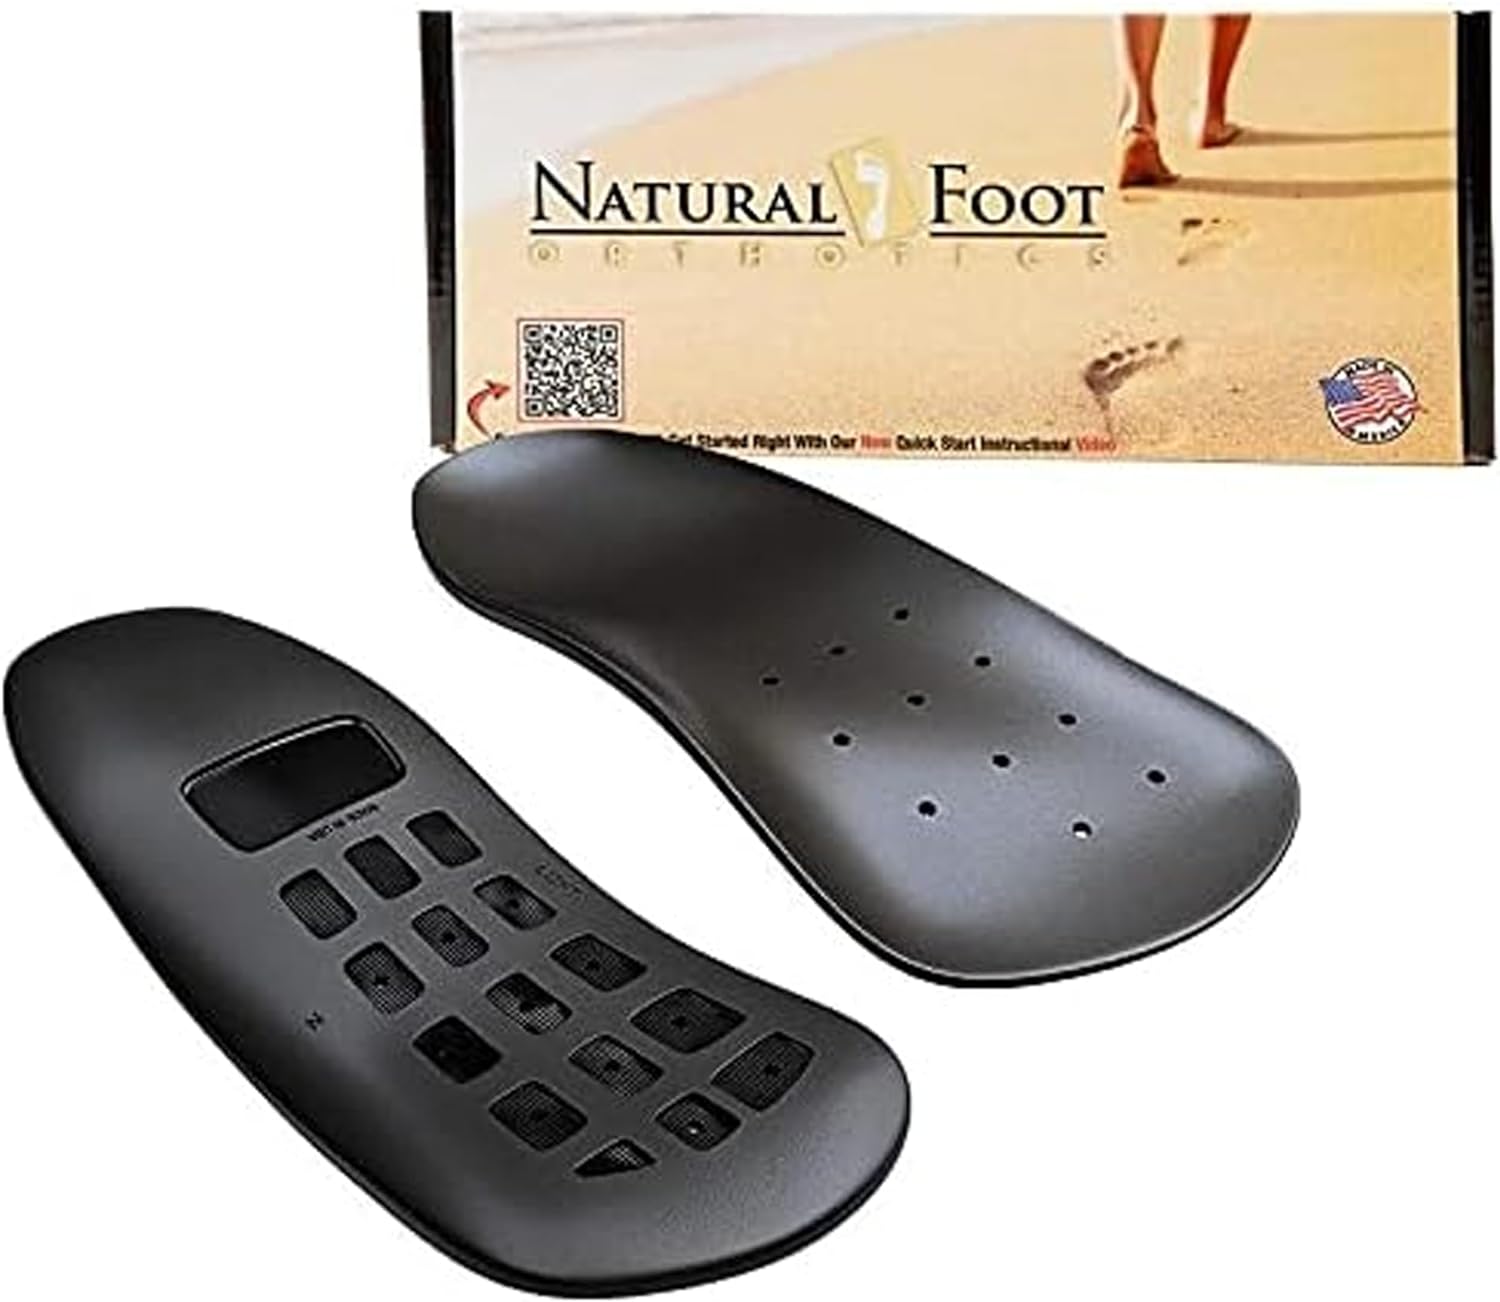 Natural Foot Orthotics. Podiatrist Designed for Low to Flat Feet. Recommended for Plantar Fasciitis, Heel Spurs, Bunions, Neuromas,  Hammertoes. USA Made. Slim Stabilizer Arch Support Shoe Insoles